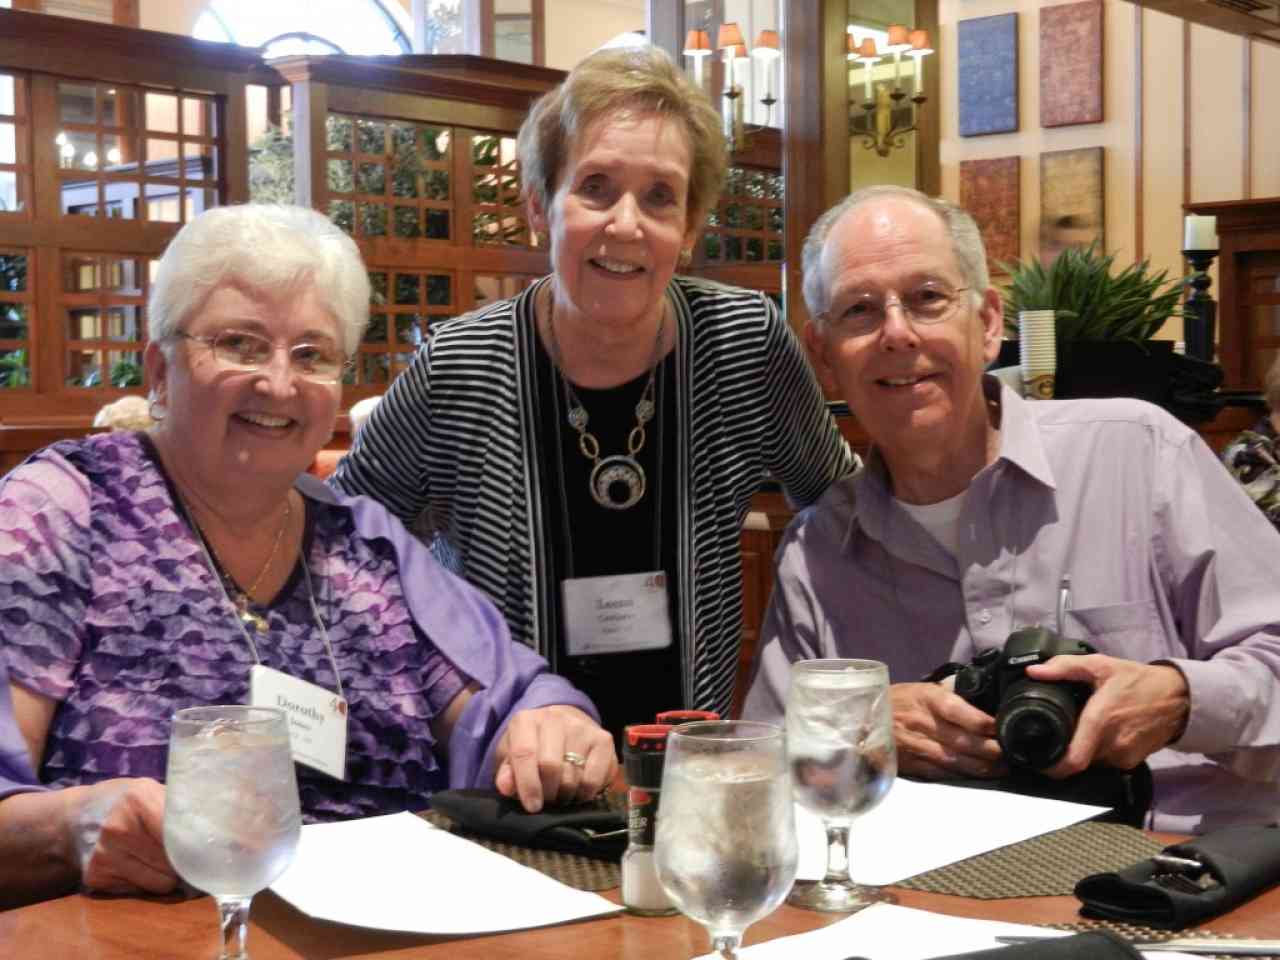 Dorothy Jones, Leena Crothers, and Don Jones at the 2012 Conference